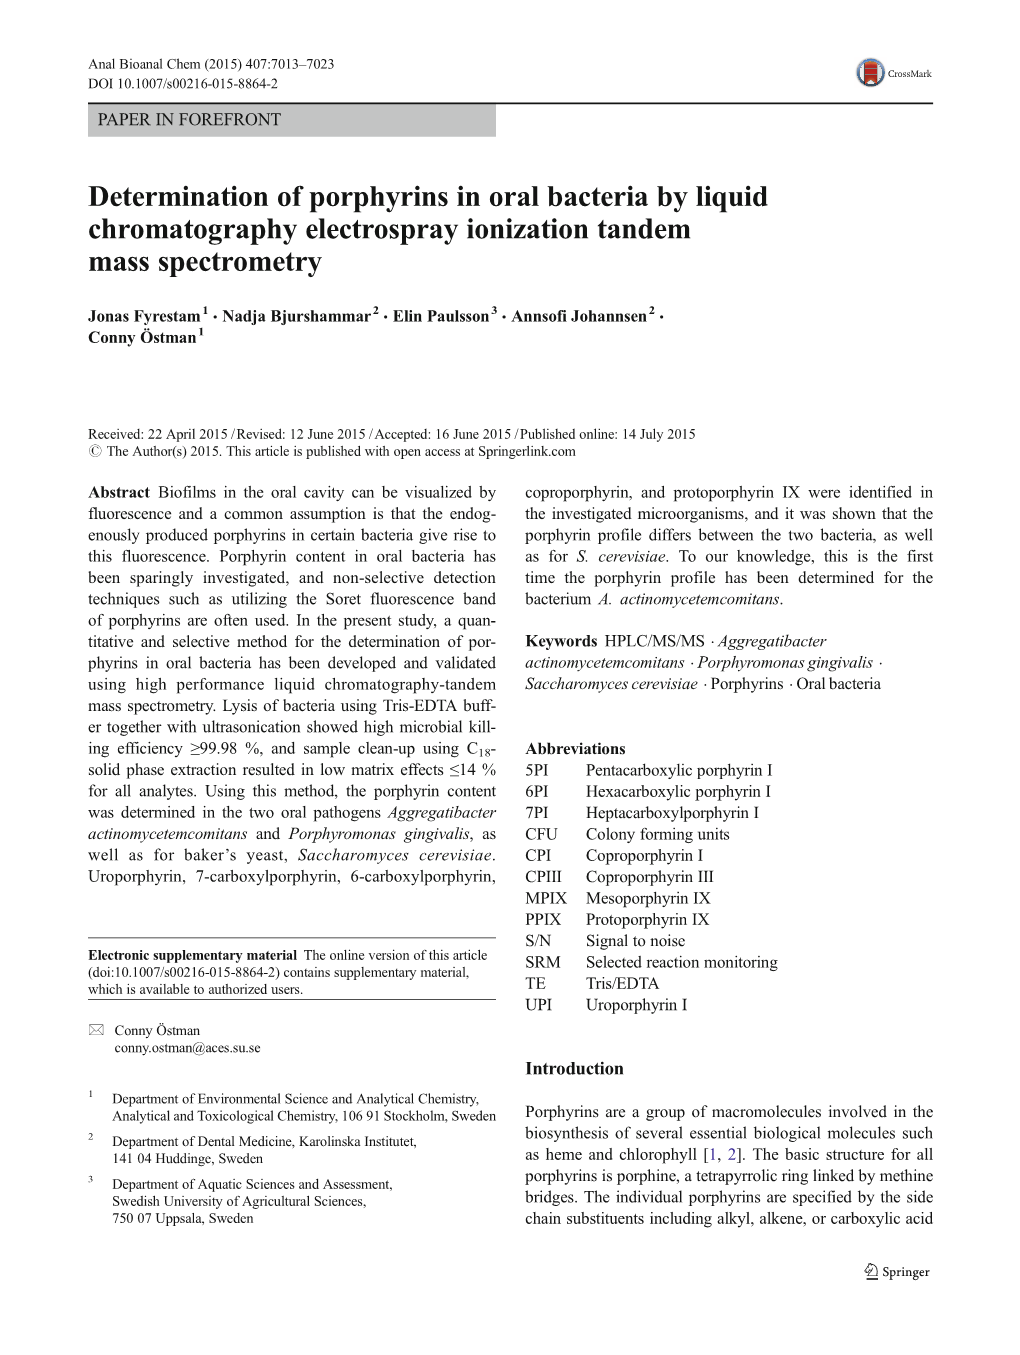 Determination of Porphyrins in Oral Bacteria by Liquid Chromatography Electrospray Ionization Tandem Mass Spectrometry